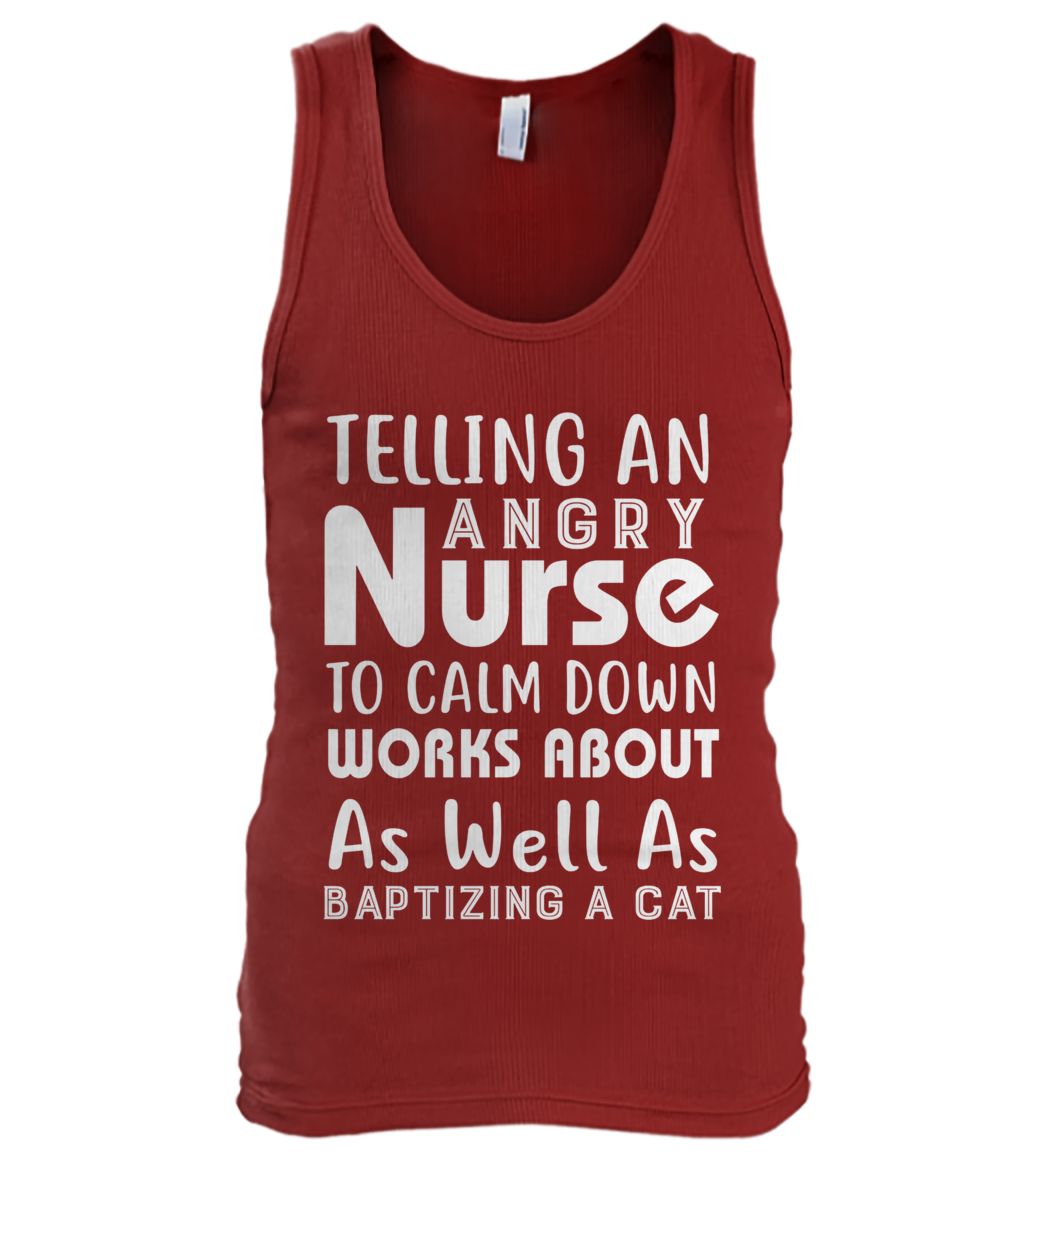 Telling an angry nurse to clam down workds about as well as baptizing a cat men's tank top